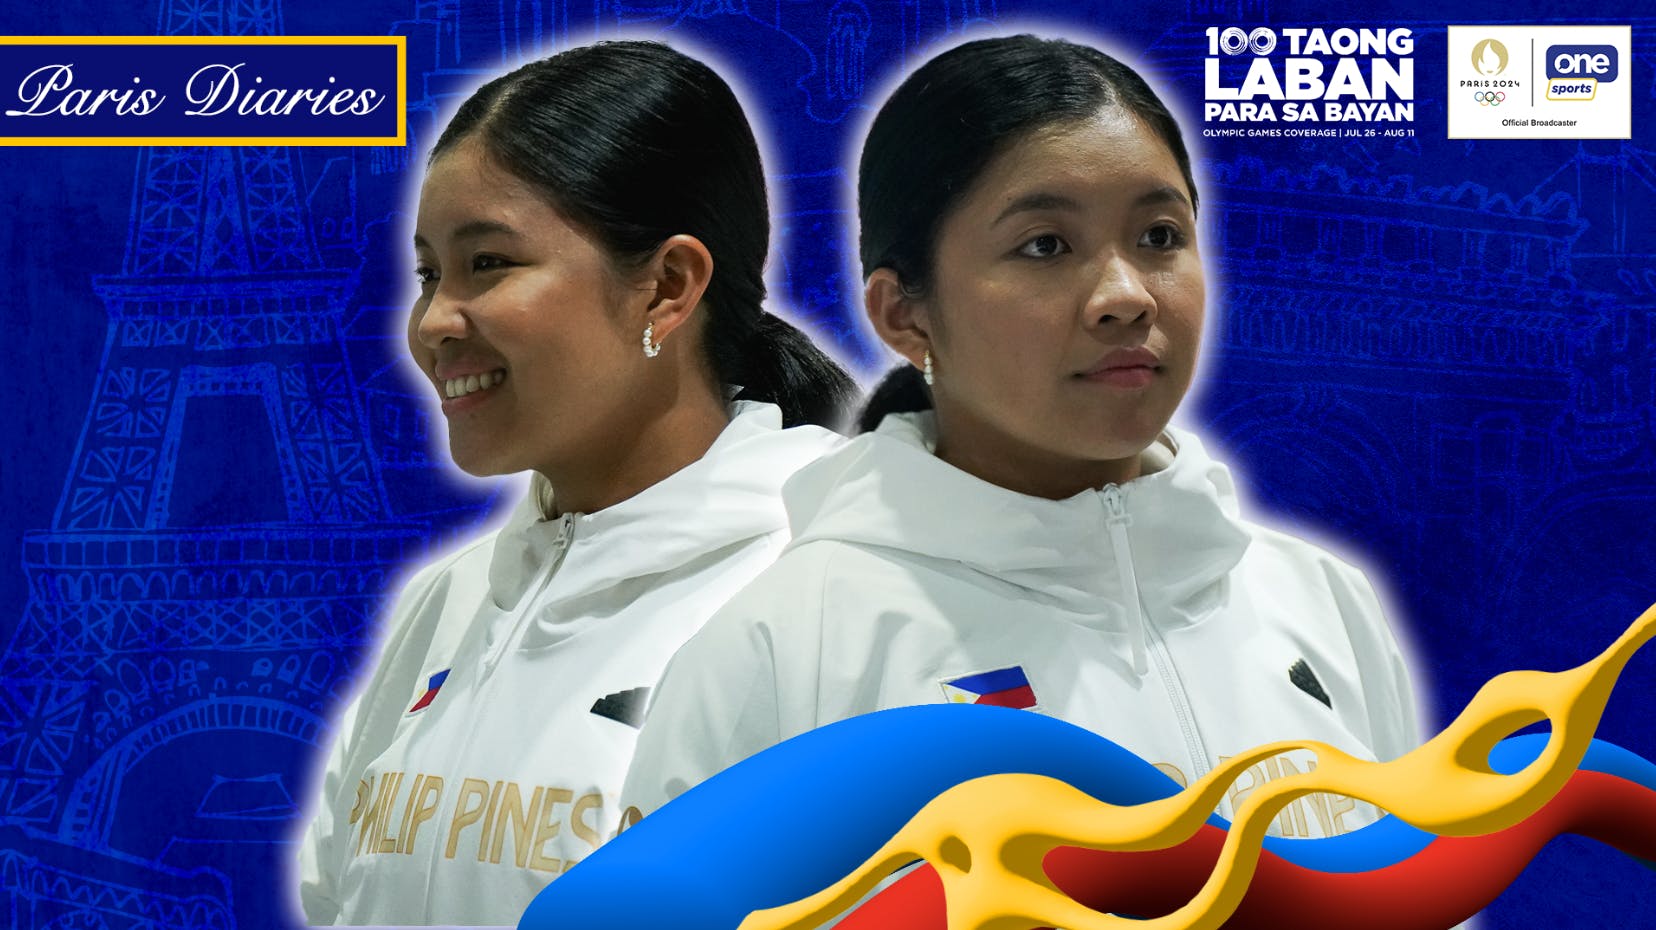 Parry to Paris: Once down but never out, Sam Catantan makes Philippine fencing history even before Olympic debut